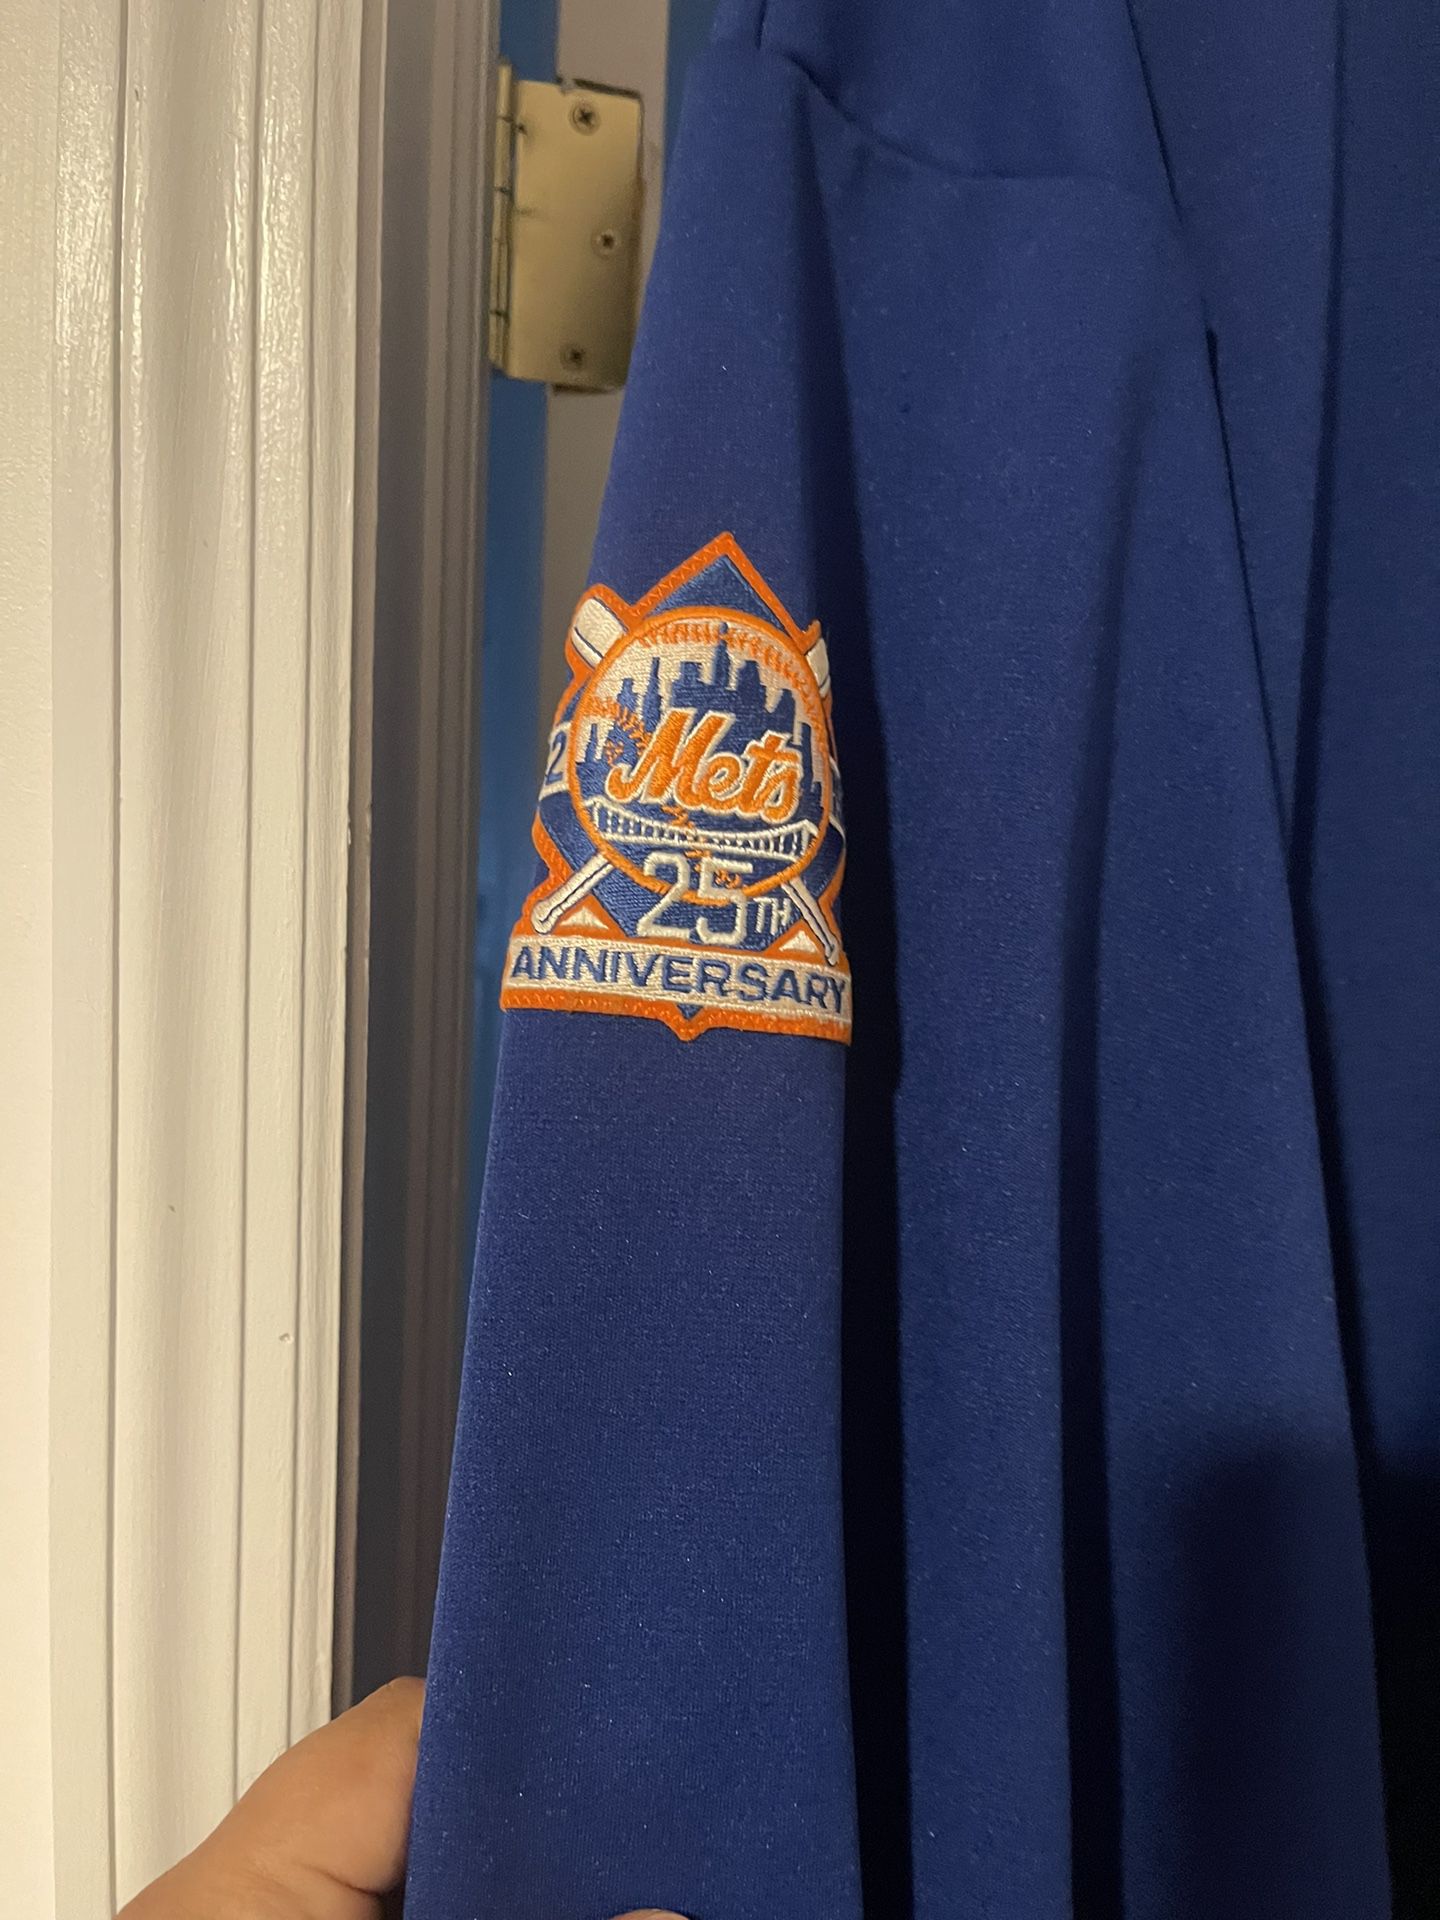 1986 New York Mets Dugout Jacket for Sale in Queens, NY - OfferUp